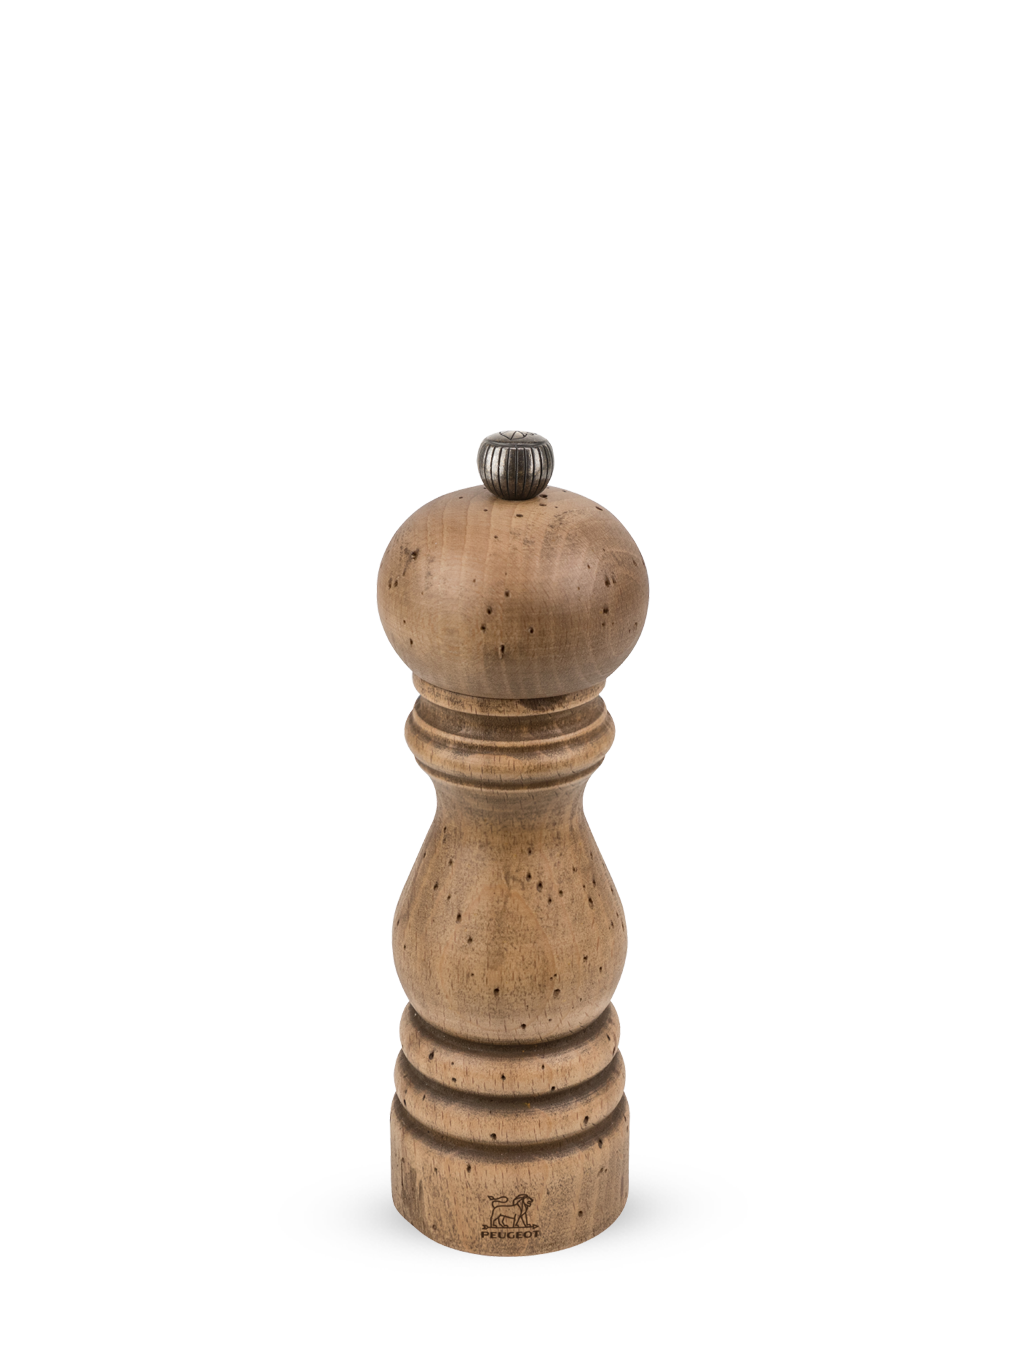 Peugeot Isen Pepper Mill U'Select – The Tuscan Kitchen